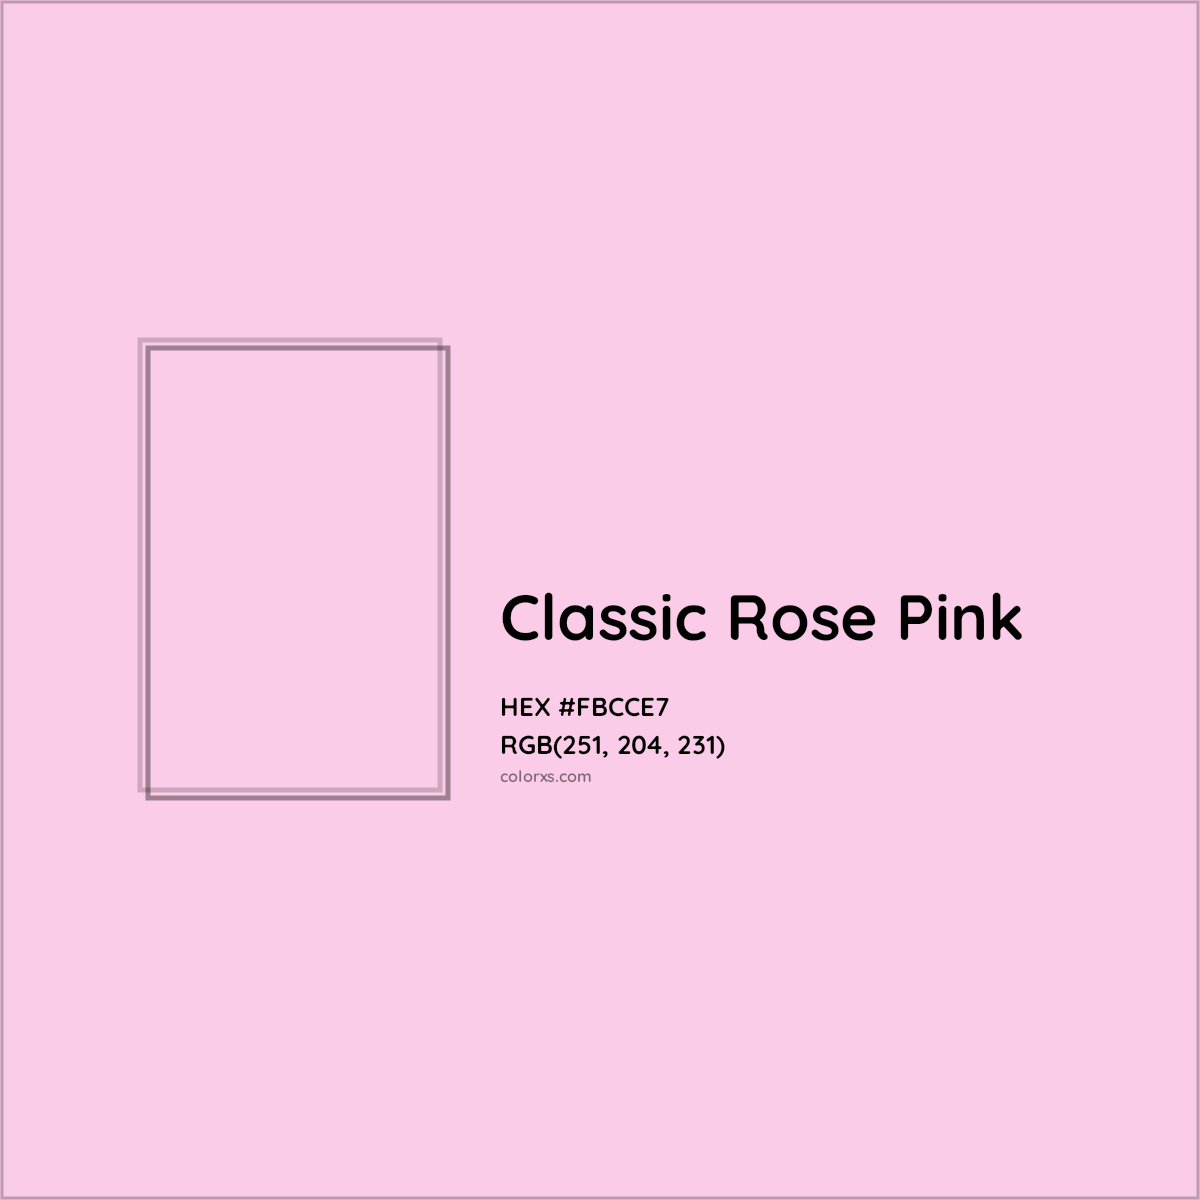 HEX #FBCCE7 Classic Rose Pink Color - Color Code